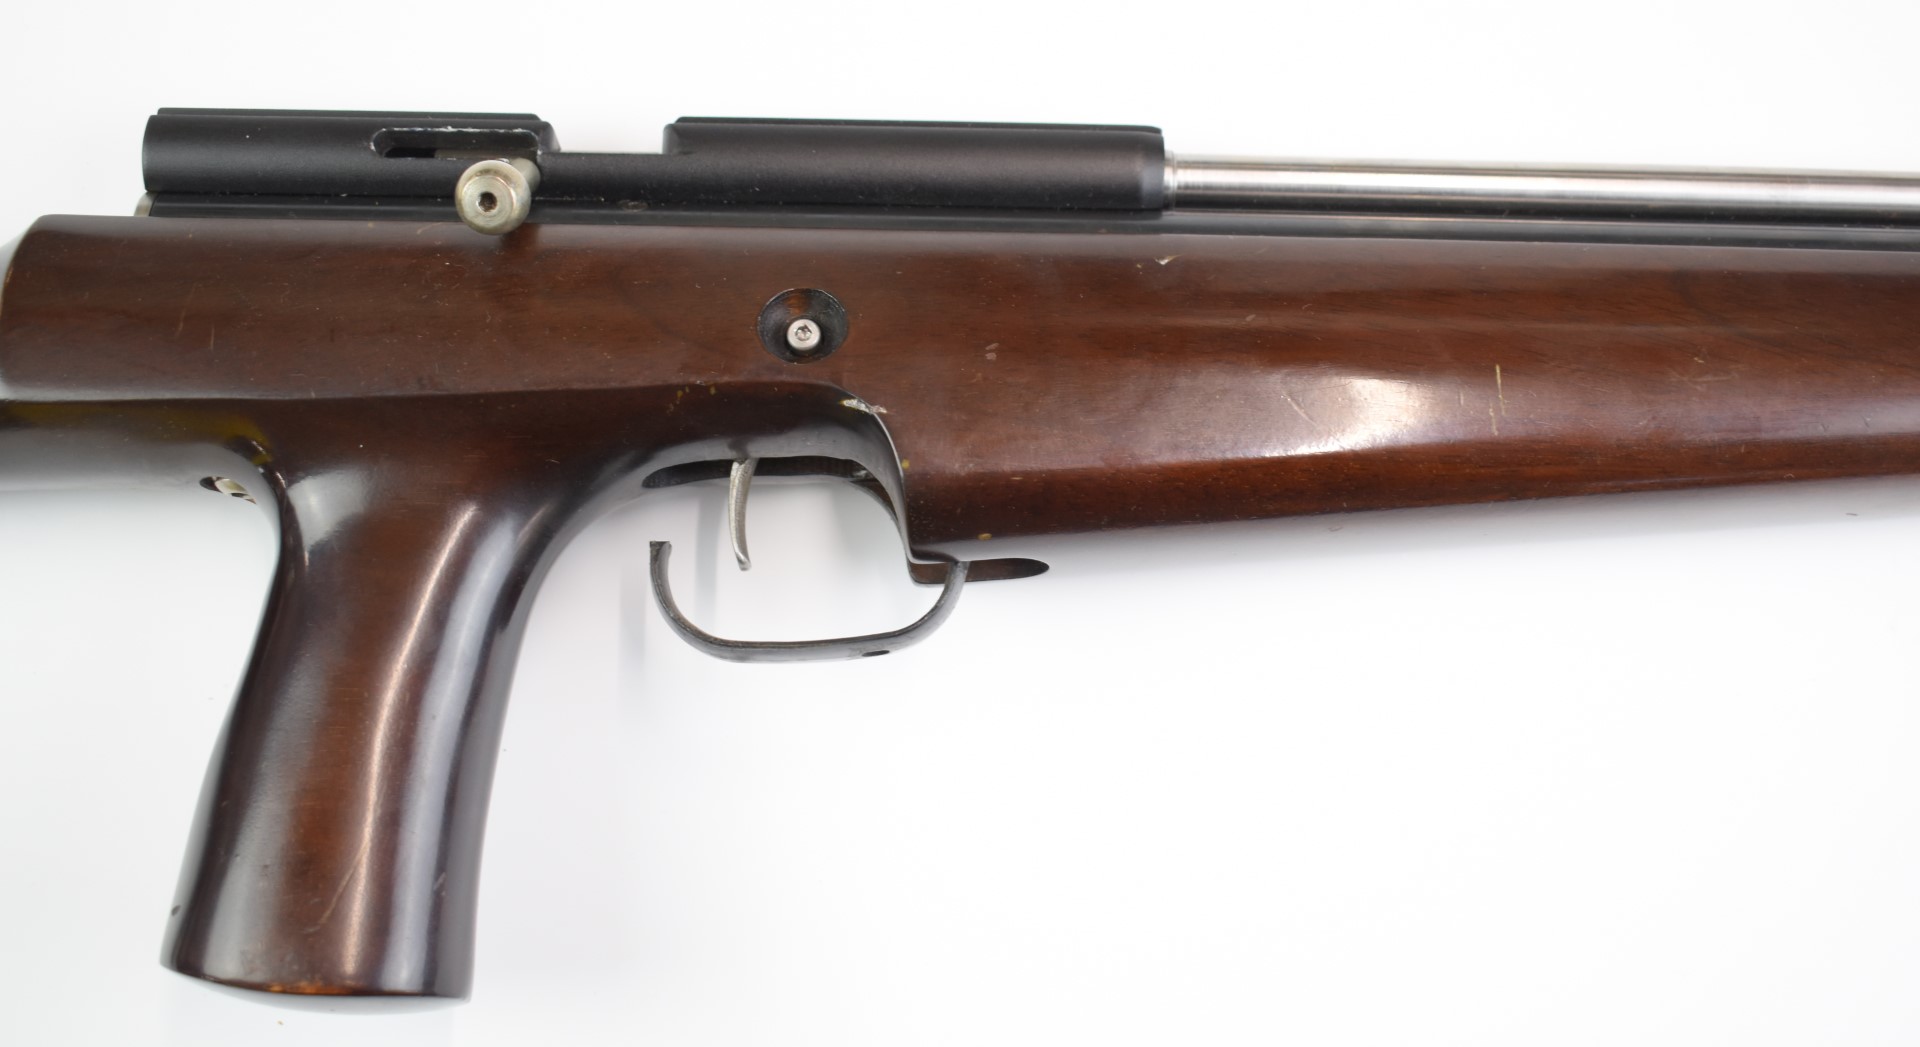 AGS-PCR1 .22 PCP bolt-action air rifle with pistol grip and adjustable trigger, serial number 00911. - Image 4 of 9